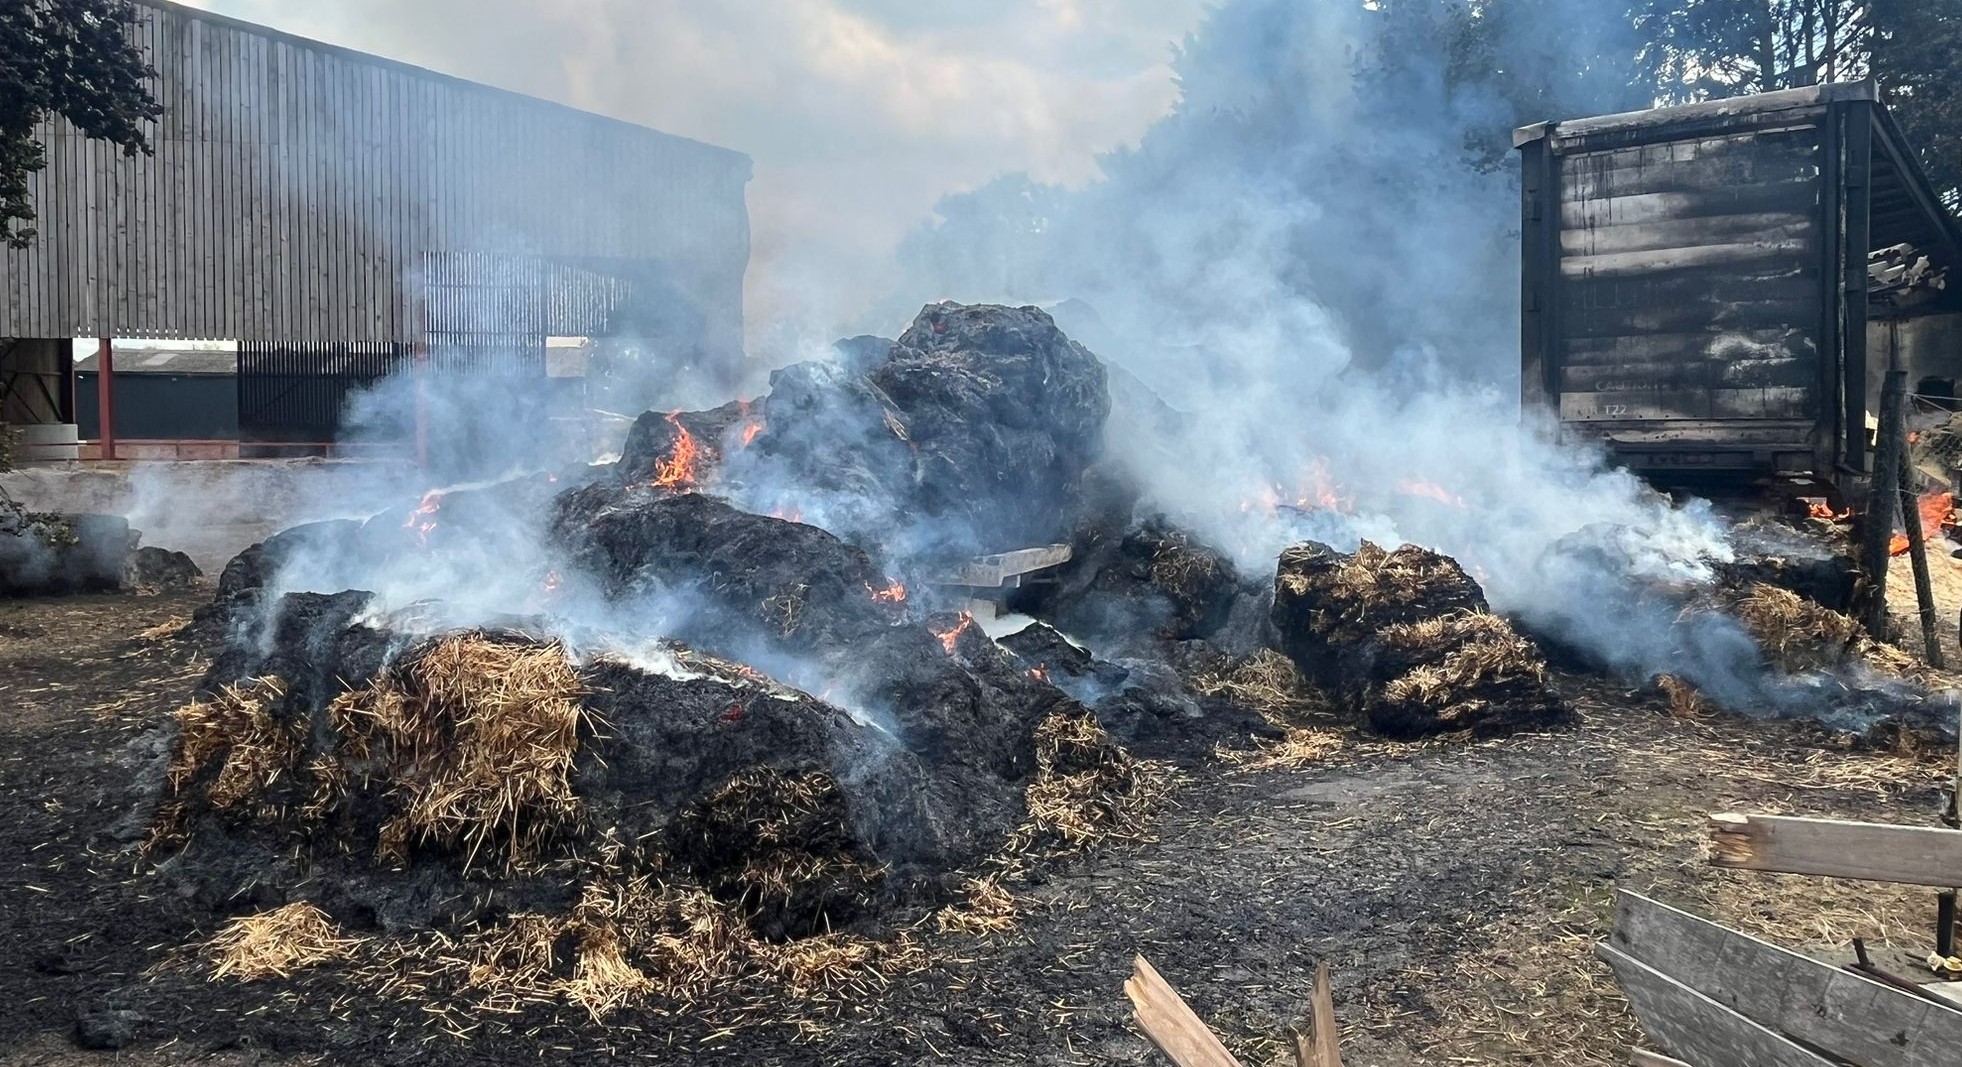 The burning heap of straw